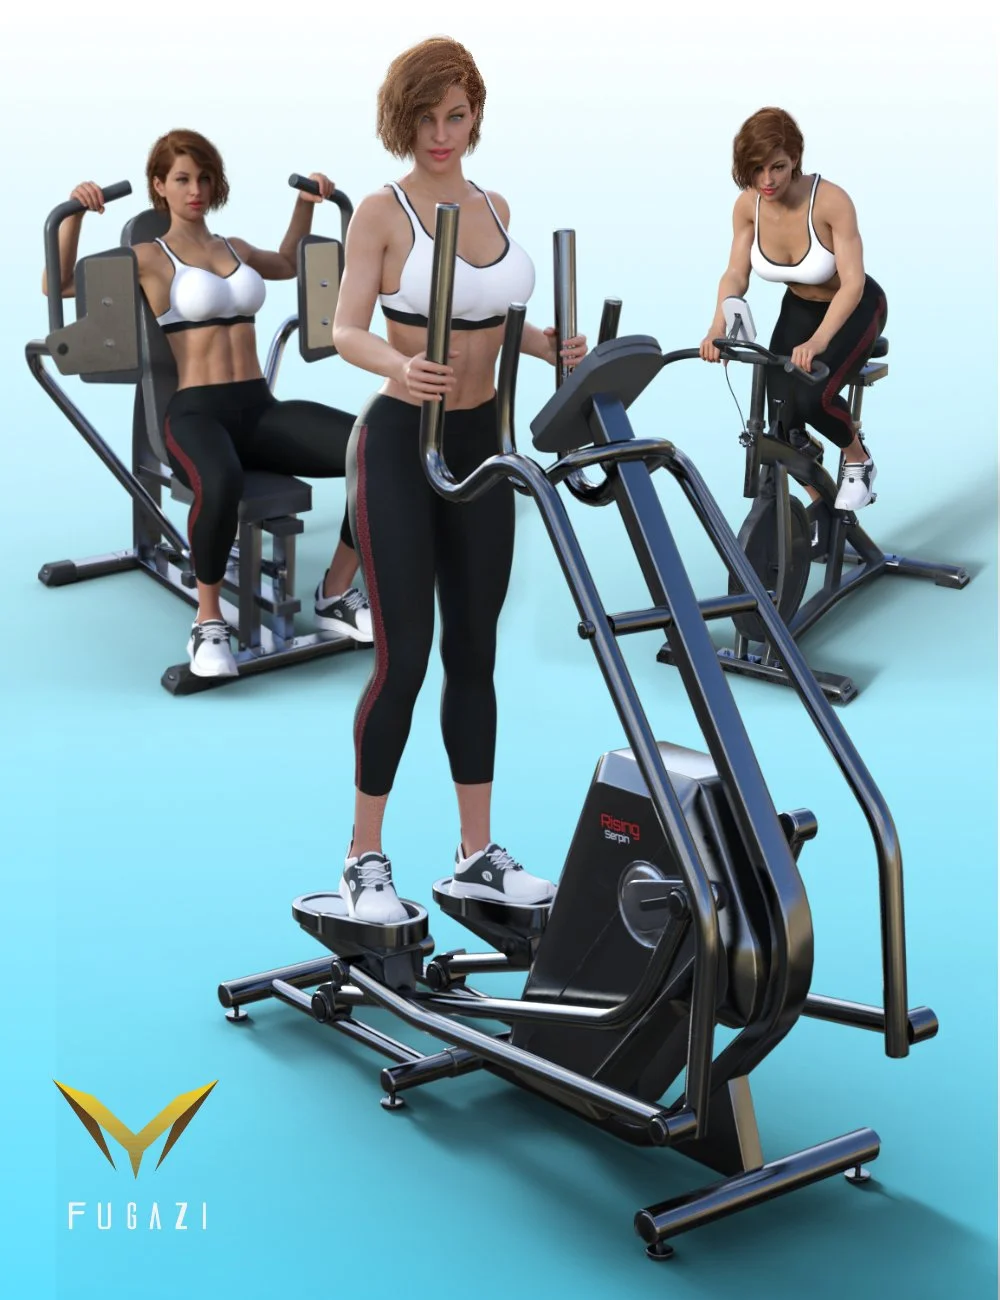 FG Fitness Equipment and Poses for Genesis 8 and 8.1 Females